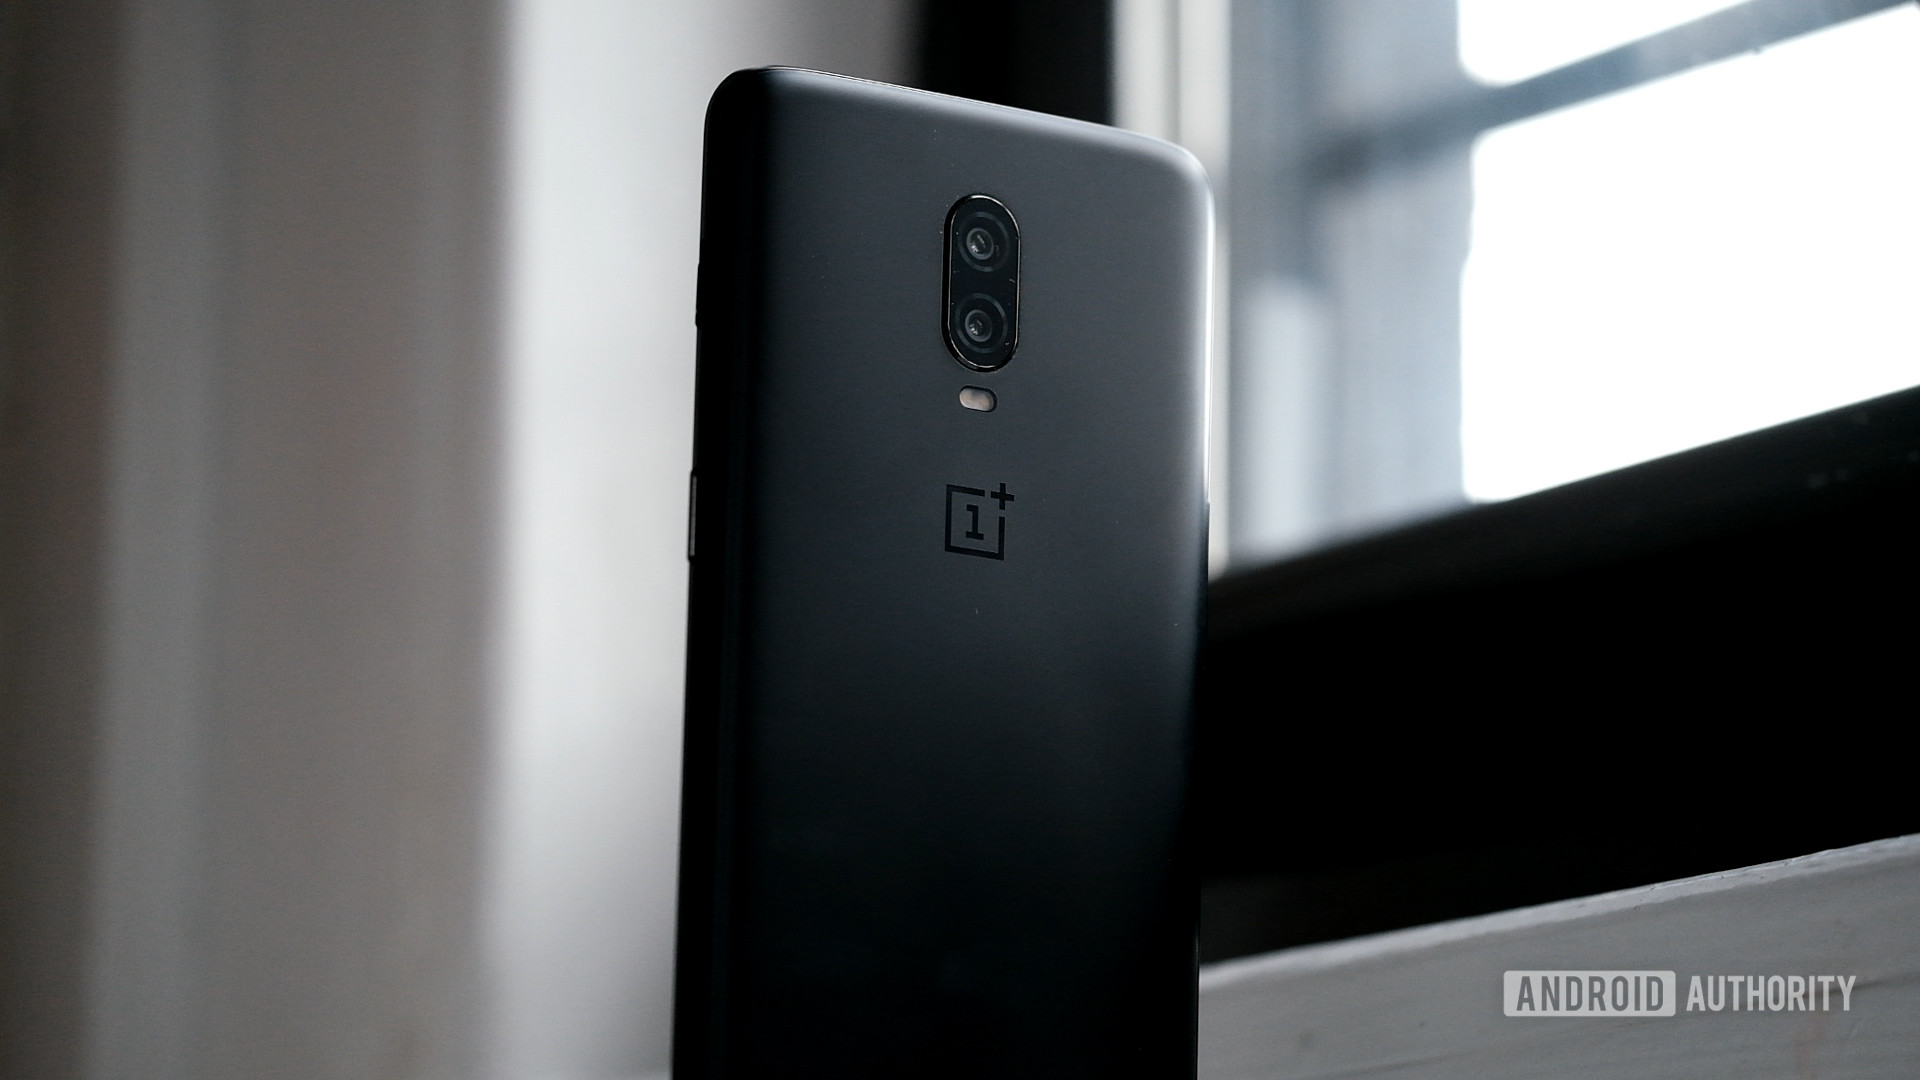 PSA: Using the OnePlus 6T on Verizon is tricky, here's how